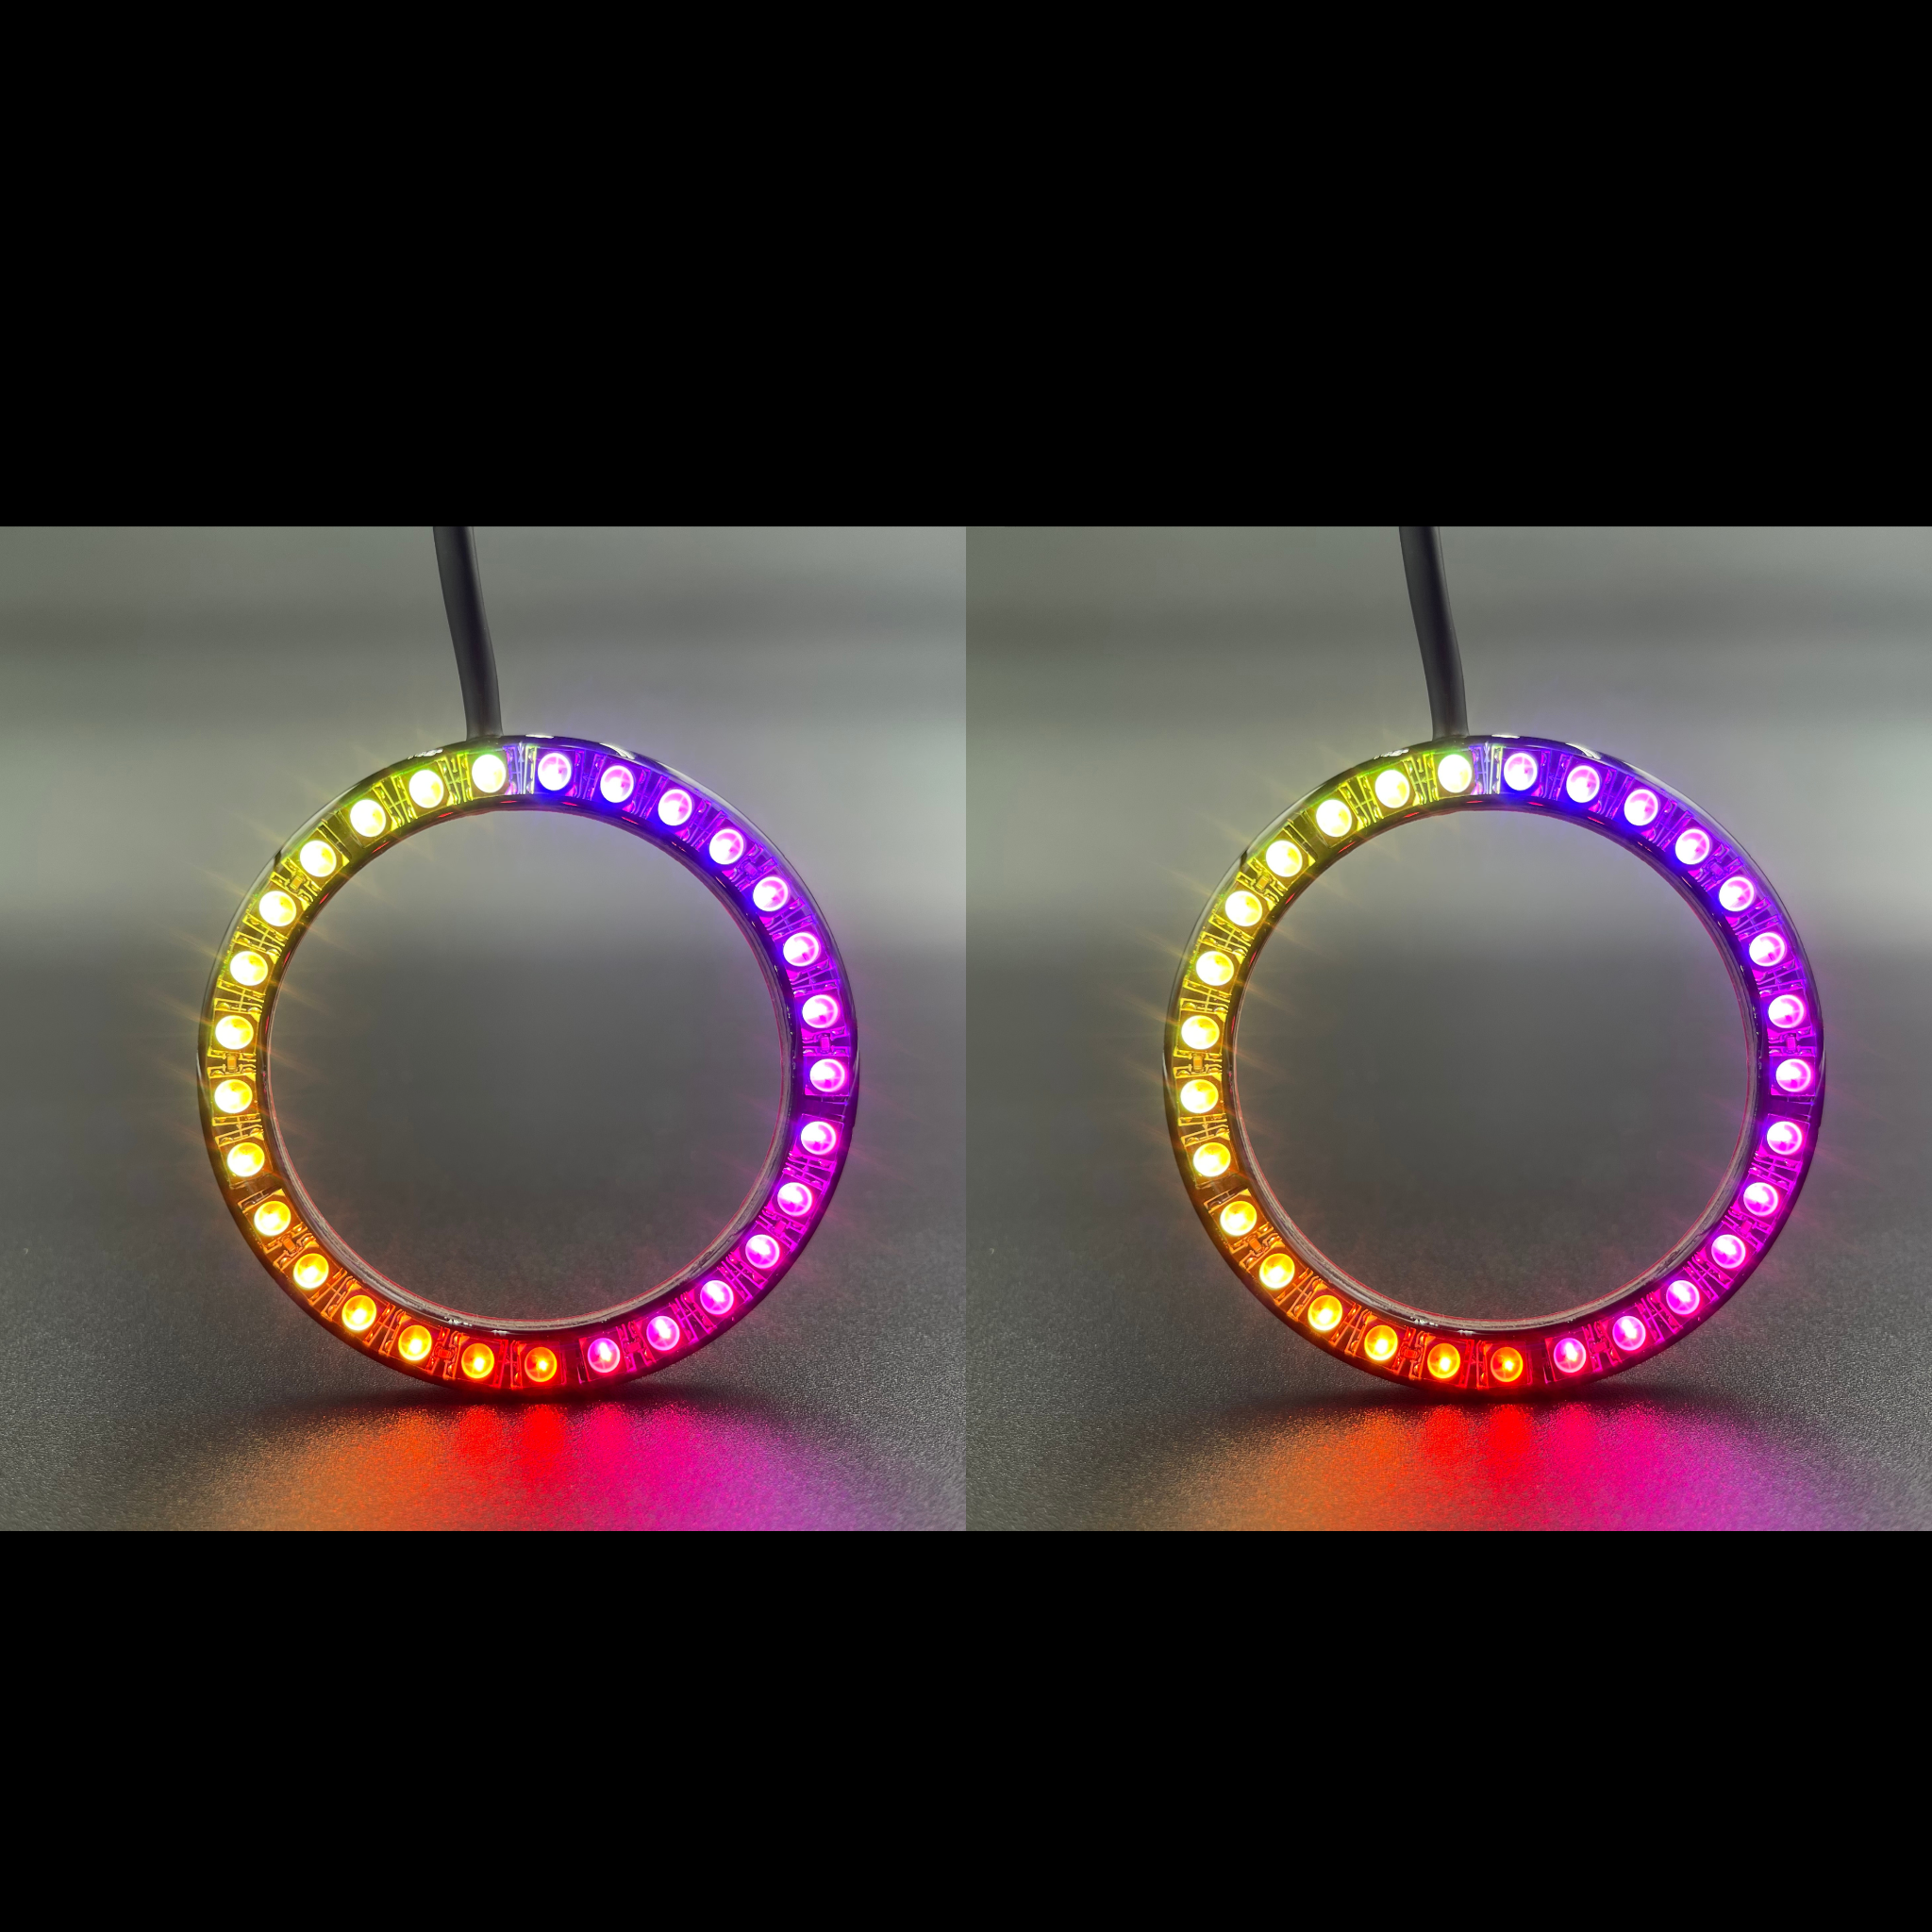 1991-1996 Nissan 300ZX Multicolor Halo Kit - RGB Halo Kits Multicolor Flow Series Color Chasing RGBWA LED headlight kit Colorshift Oracle Lighting Trendz OneUpLighting Morimoto theretrofitsource AutoLEDTech Diode Dynamics